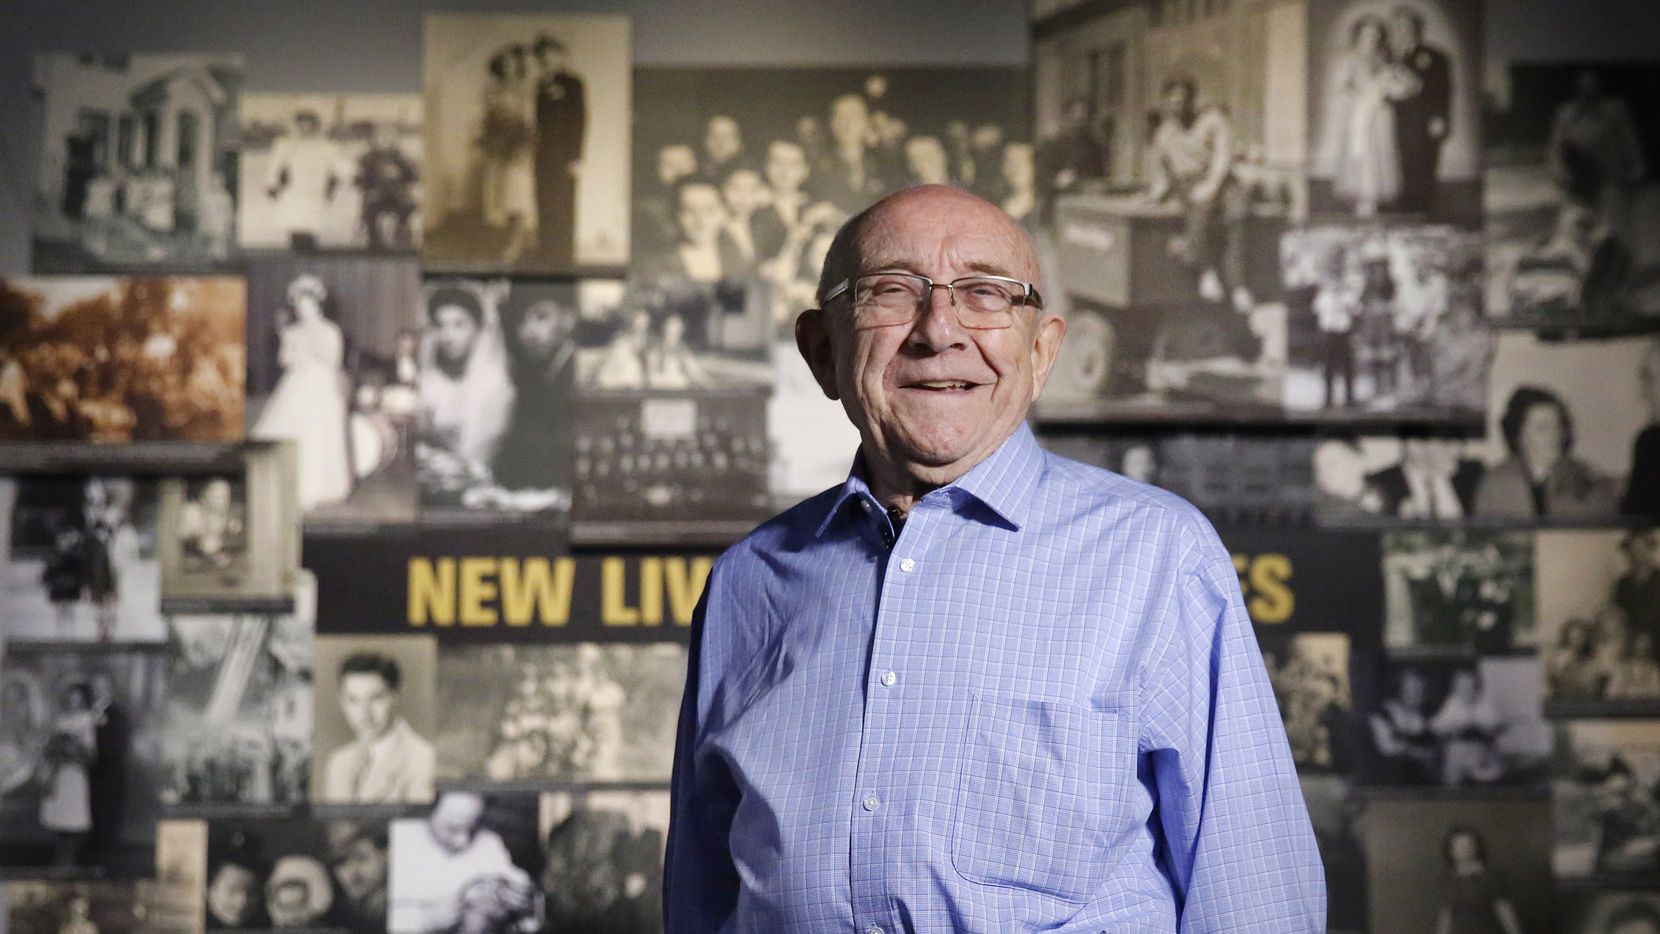 Holocaust survivor Max Glauben poses for a photo at the Dallas Holocaust and Human Rights...